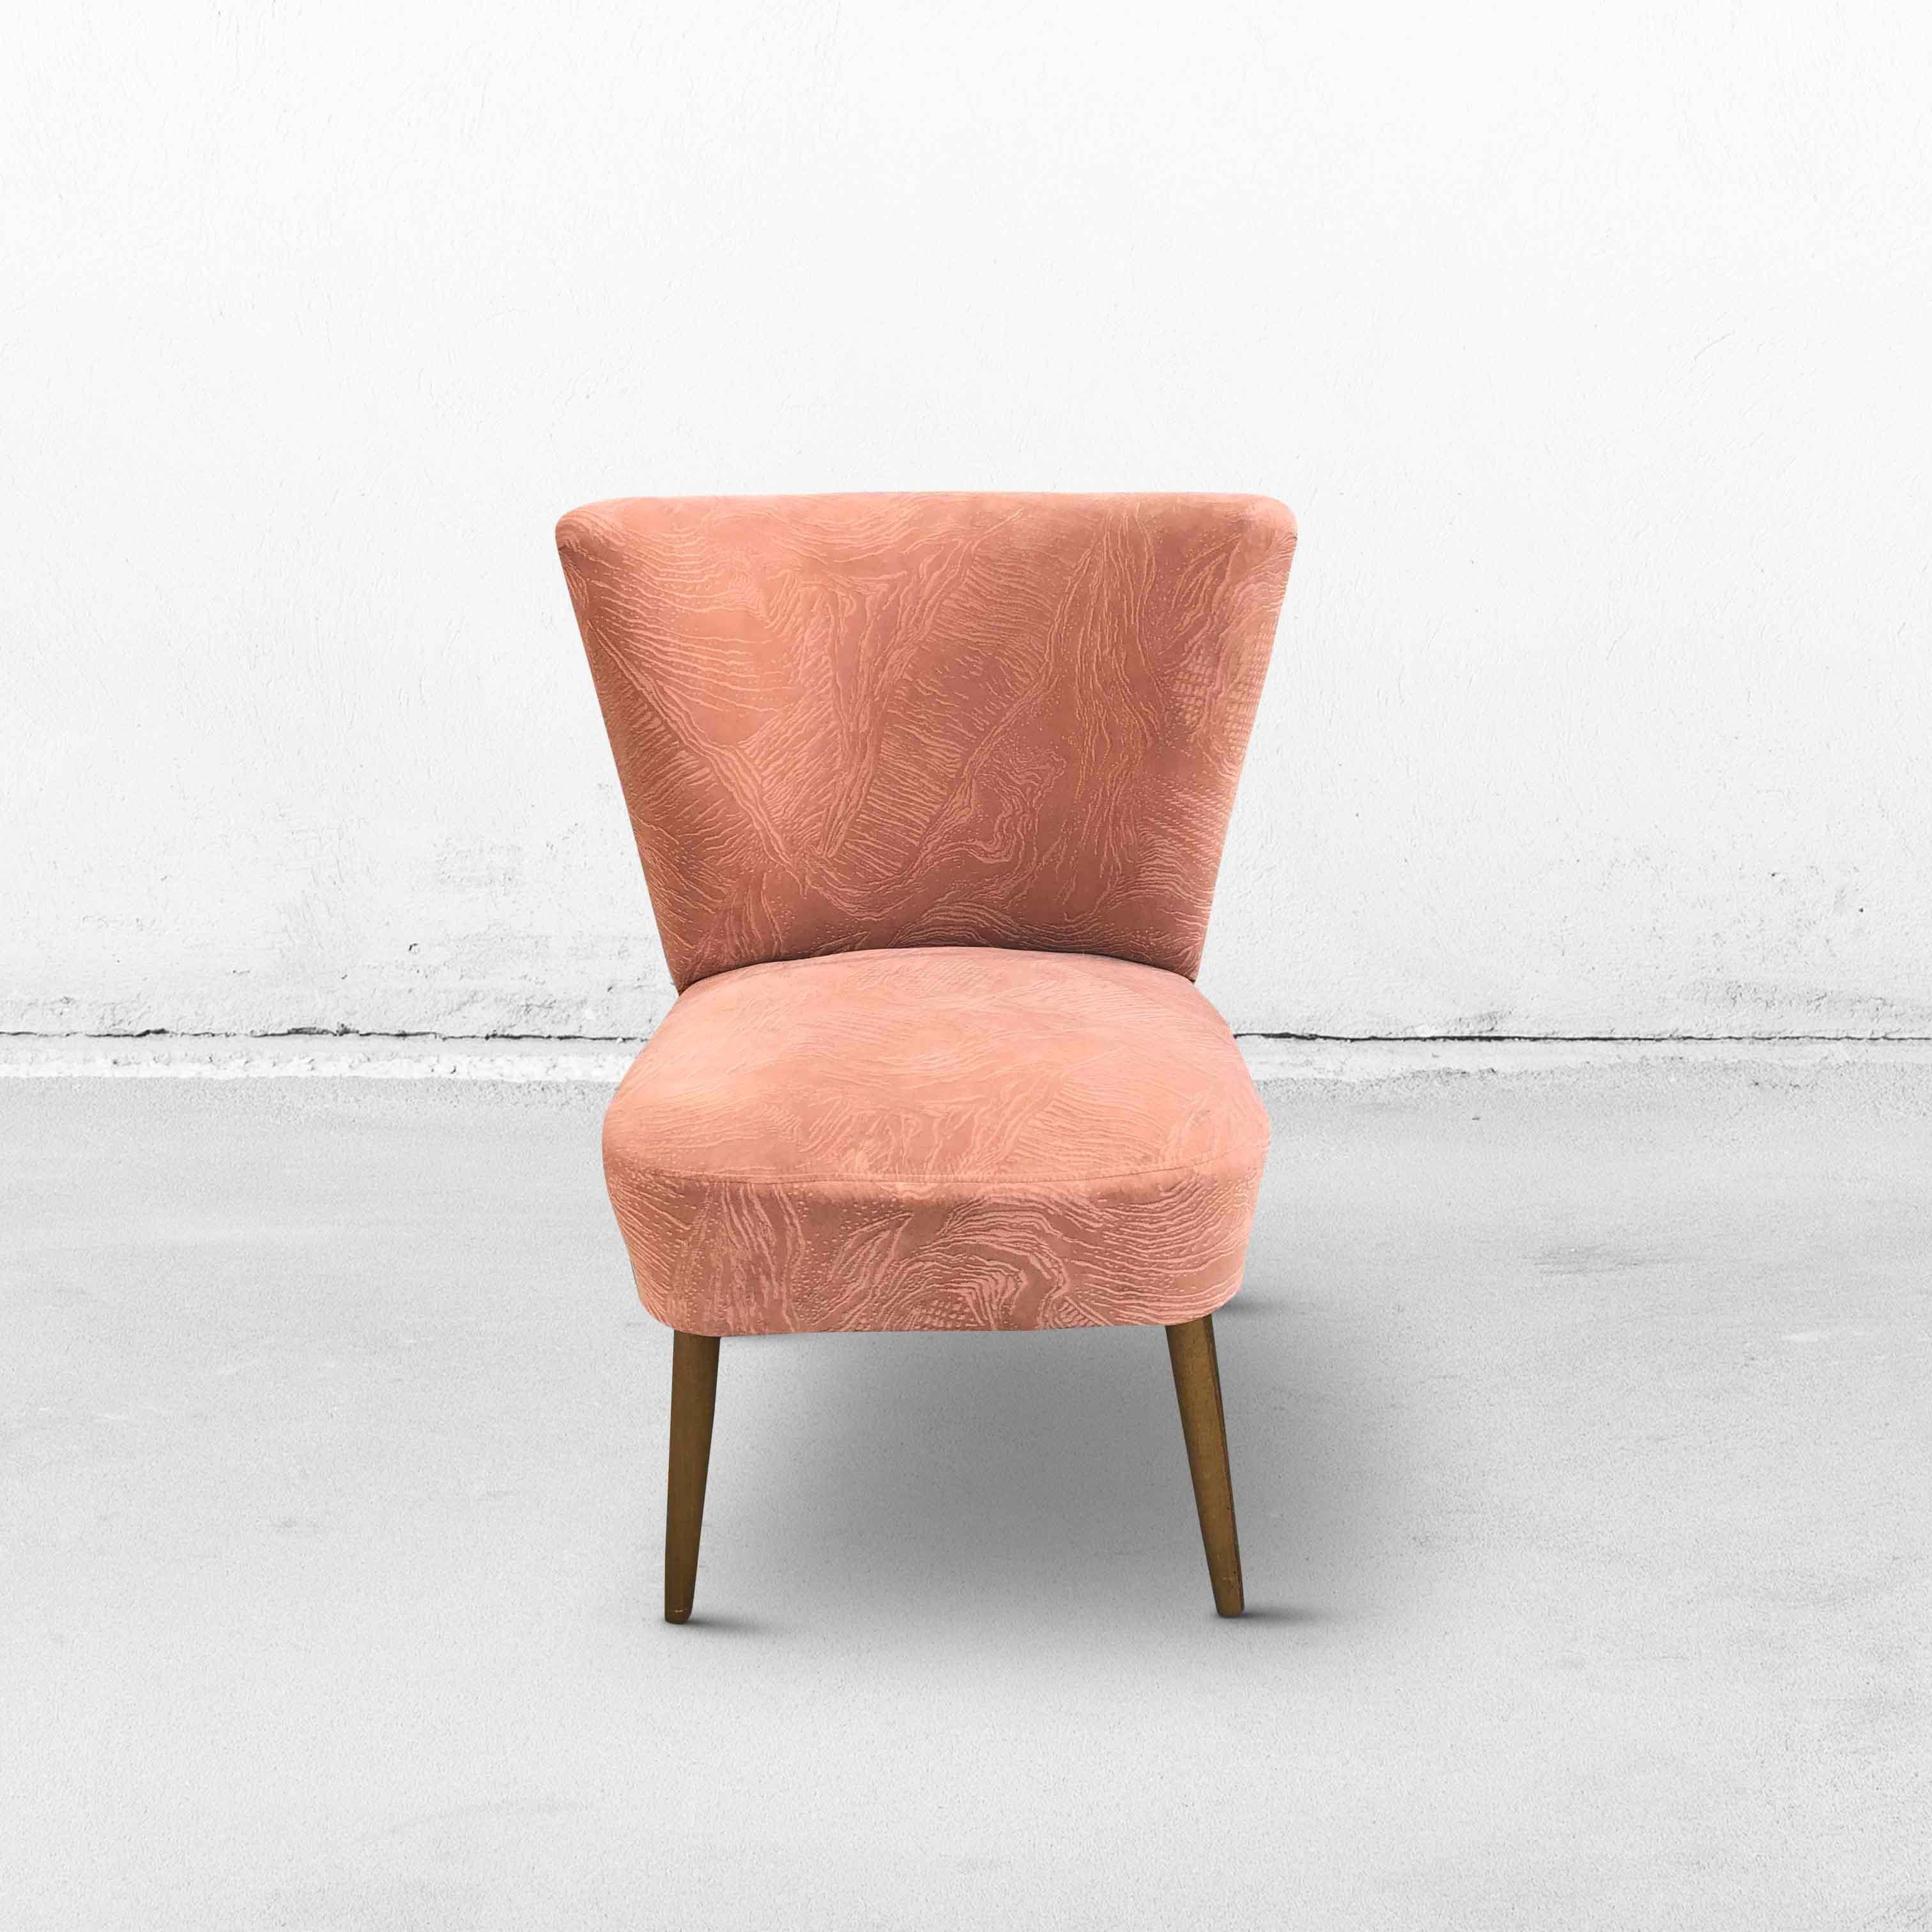 Cocktail chair in salmon pink with flared wooden legs. This model is sometimes referred to as an 'Expo '58' seat, since these chairs were used during the World Exhibit of 1958 in Brussels, Belgium. 
The seating comfort is still very good! The legs